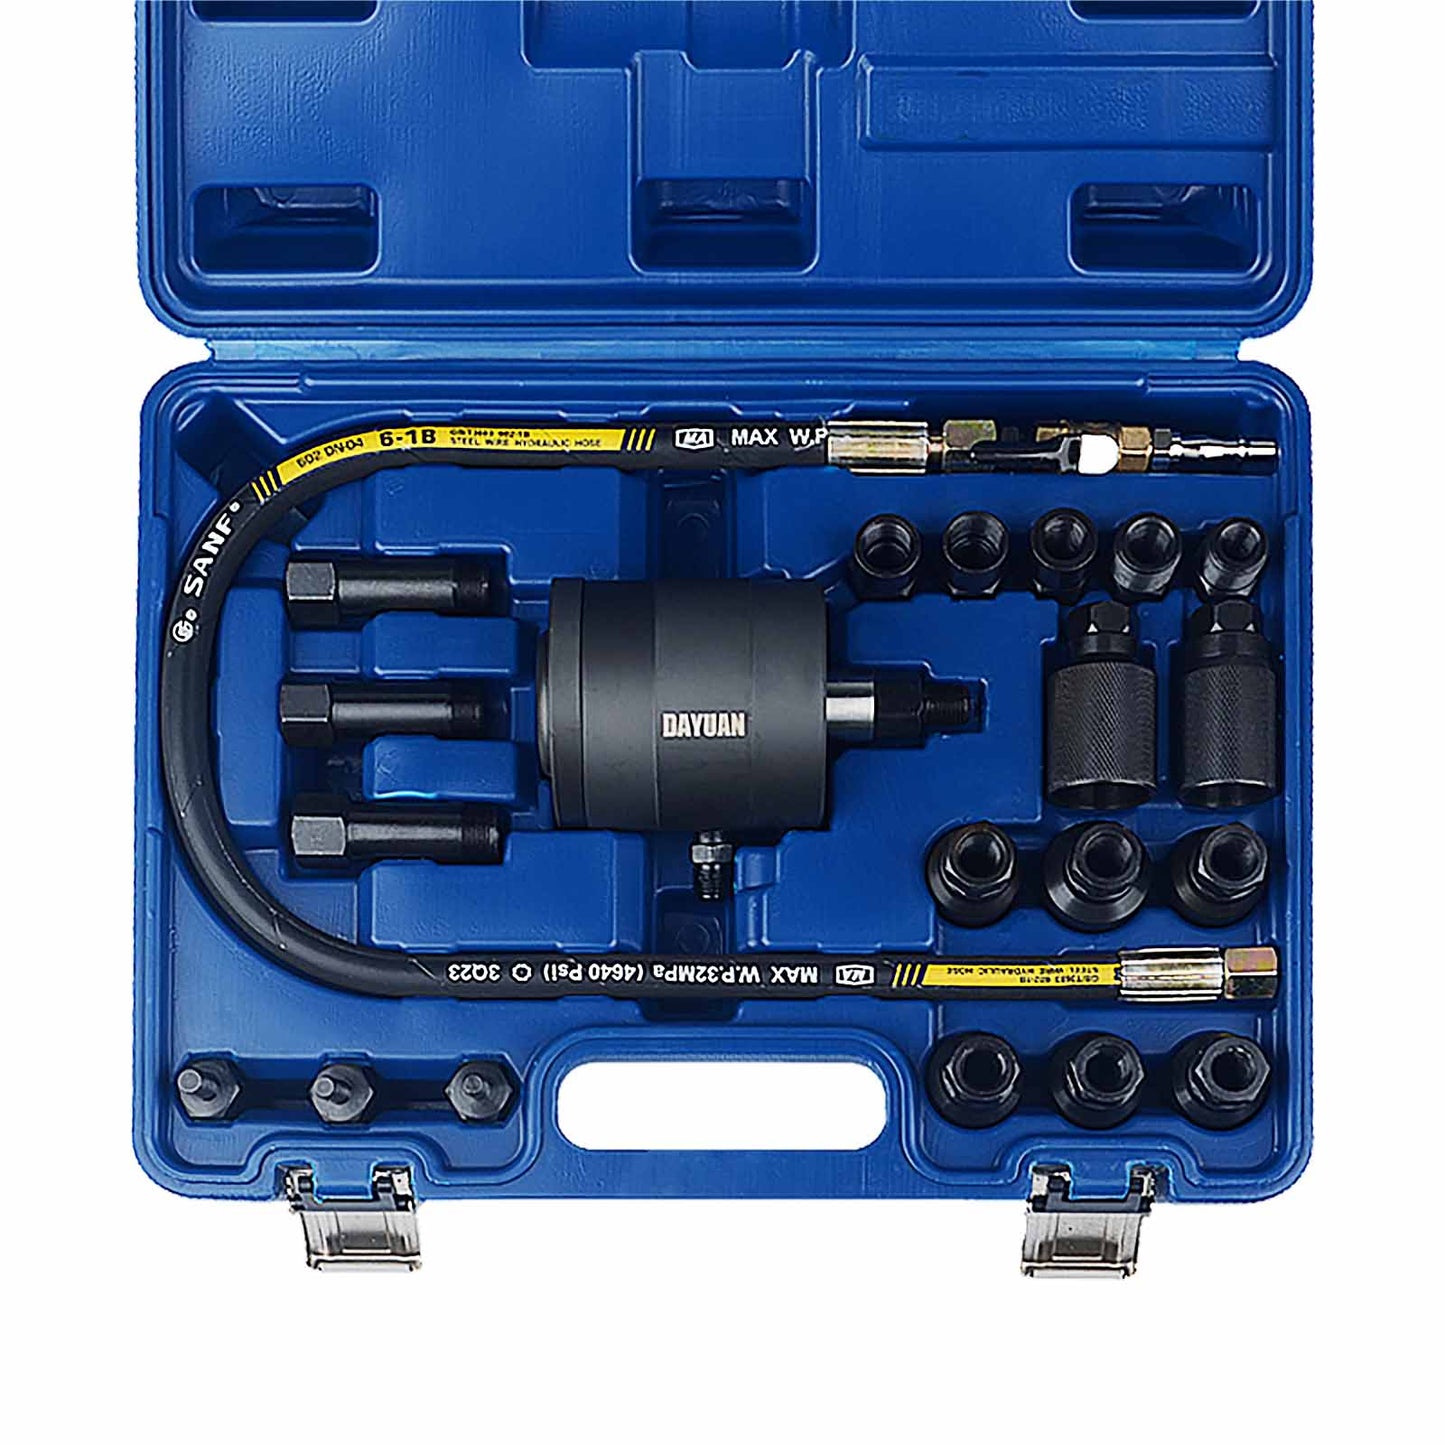 Professional DIESEL INJECTOR PULLER Pneumatic injector extractor puller kit